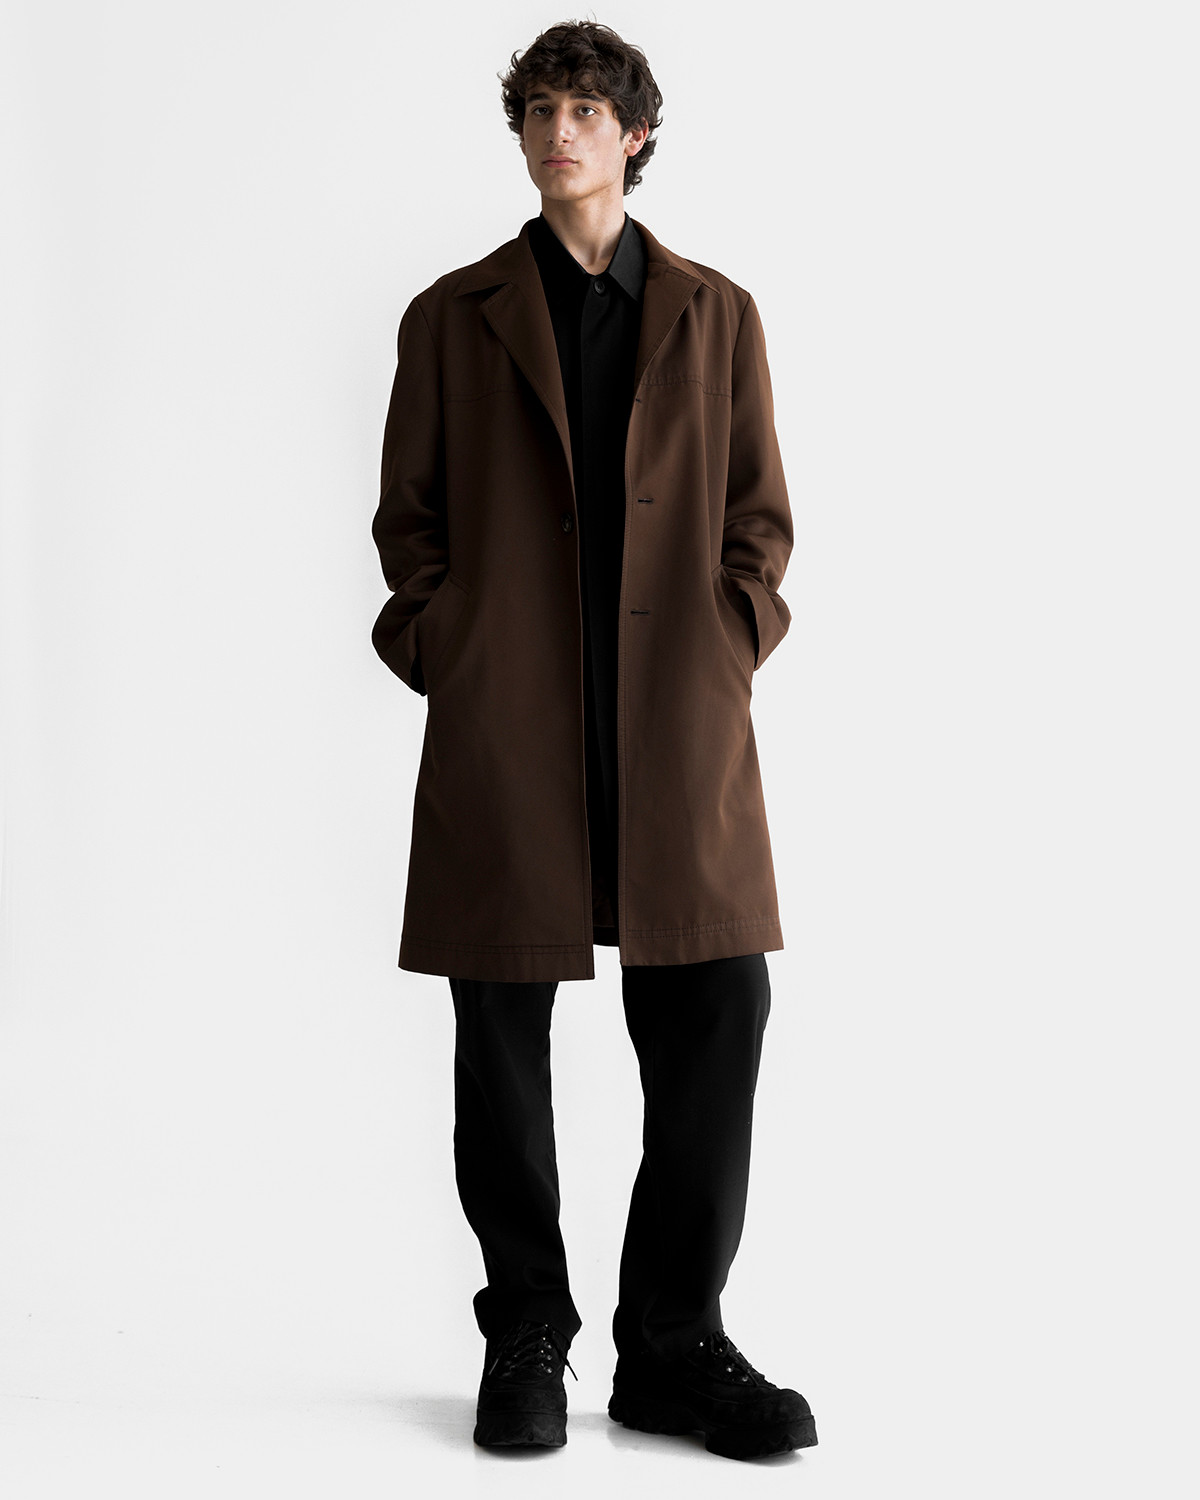 Alex is wearing a sienna cotton PARENT coat, a black satin PARENT jacket and classic NASIR trousers by Ruslan Nasir